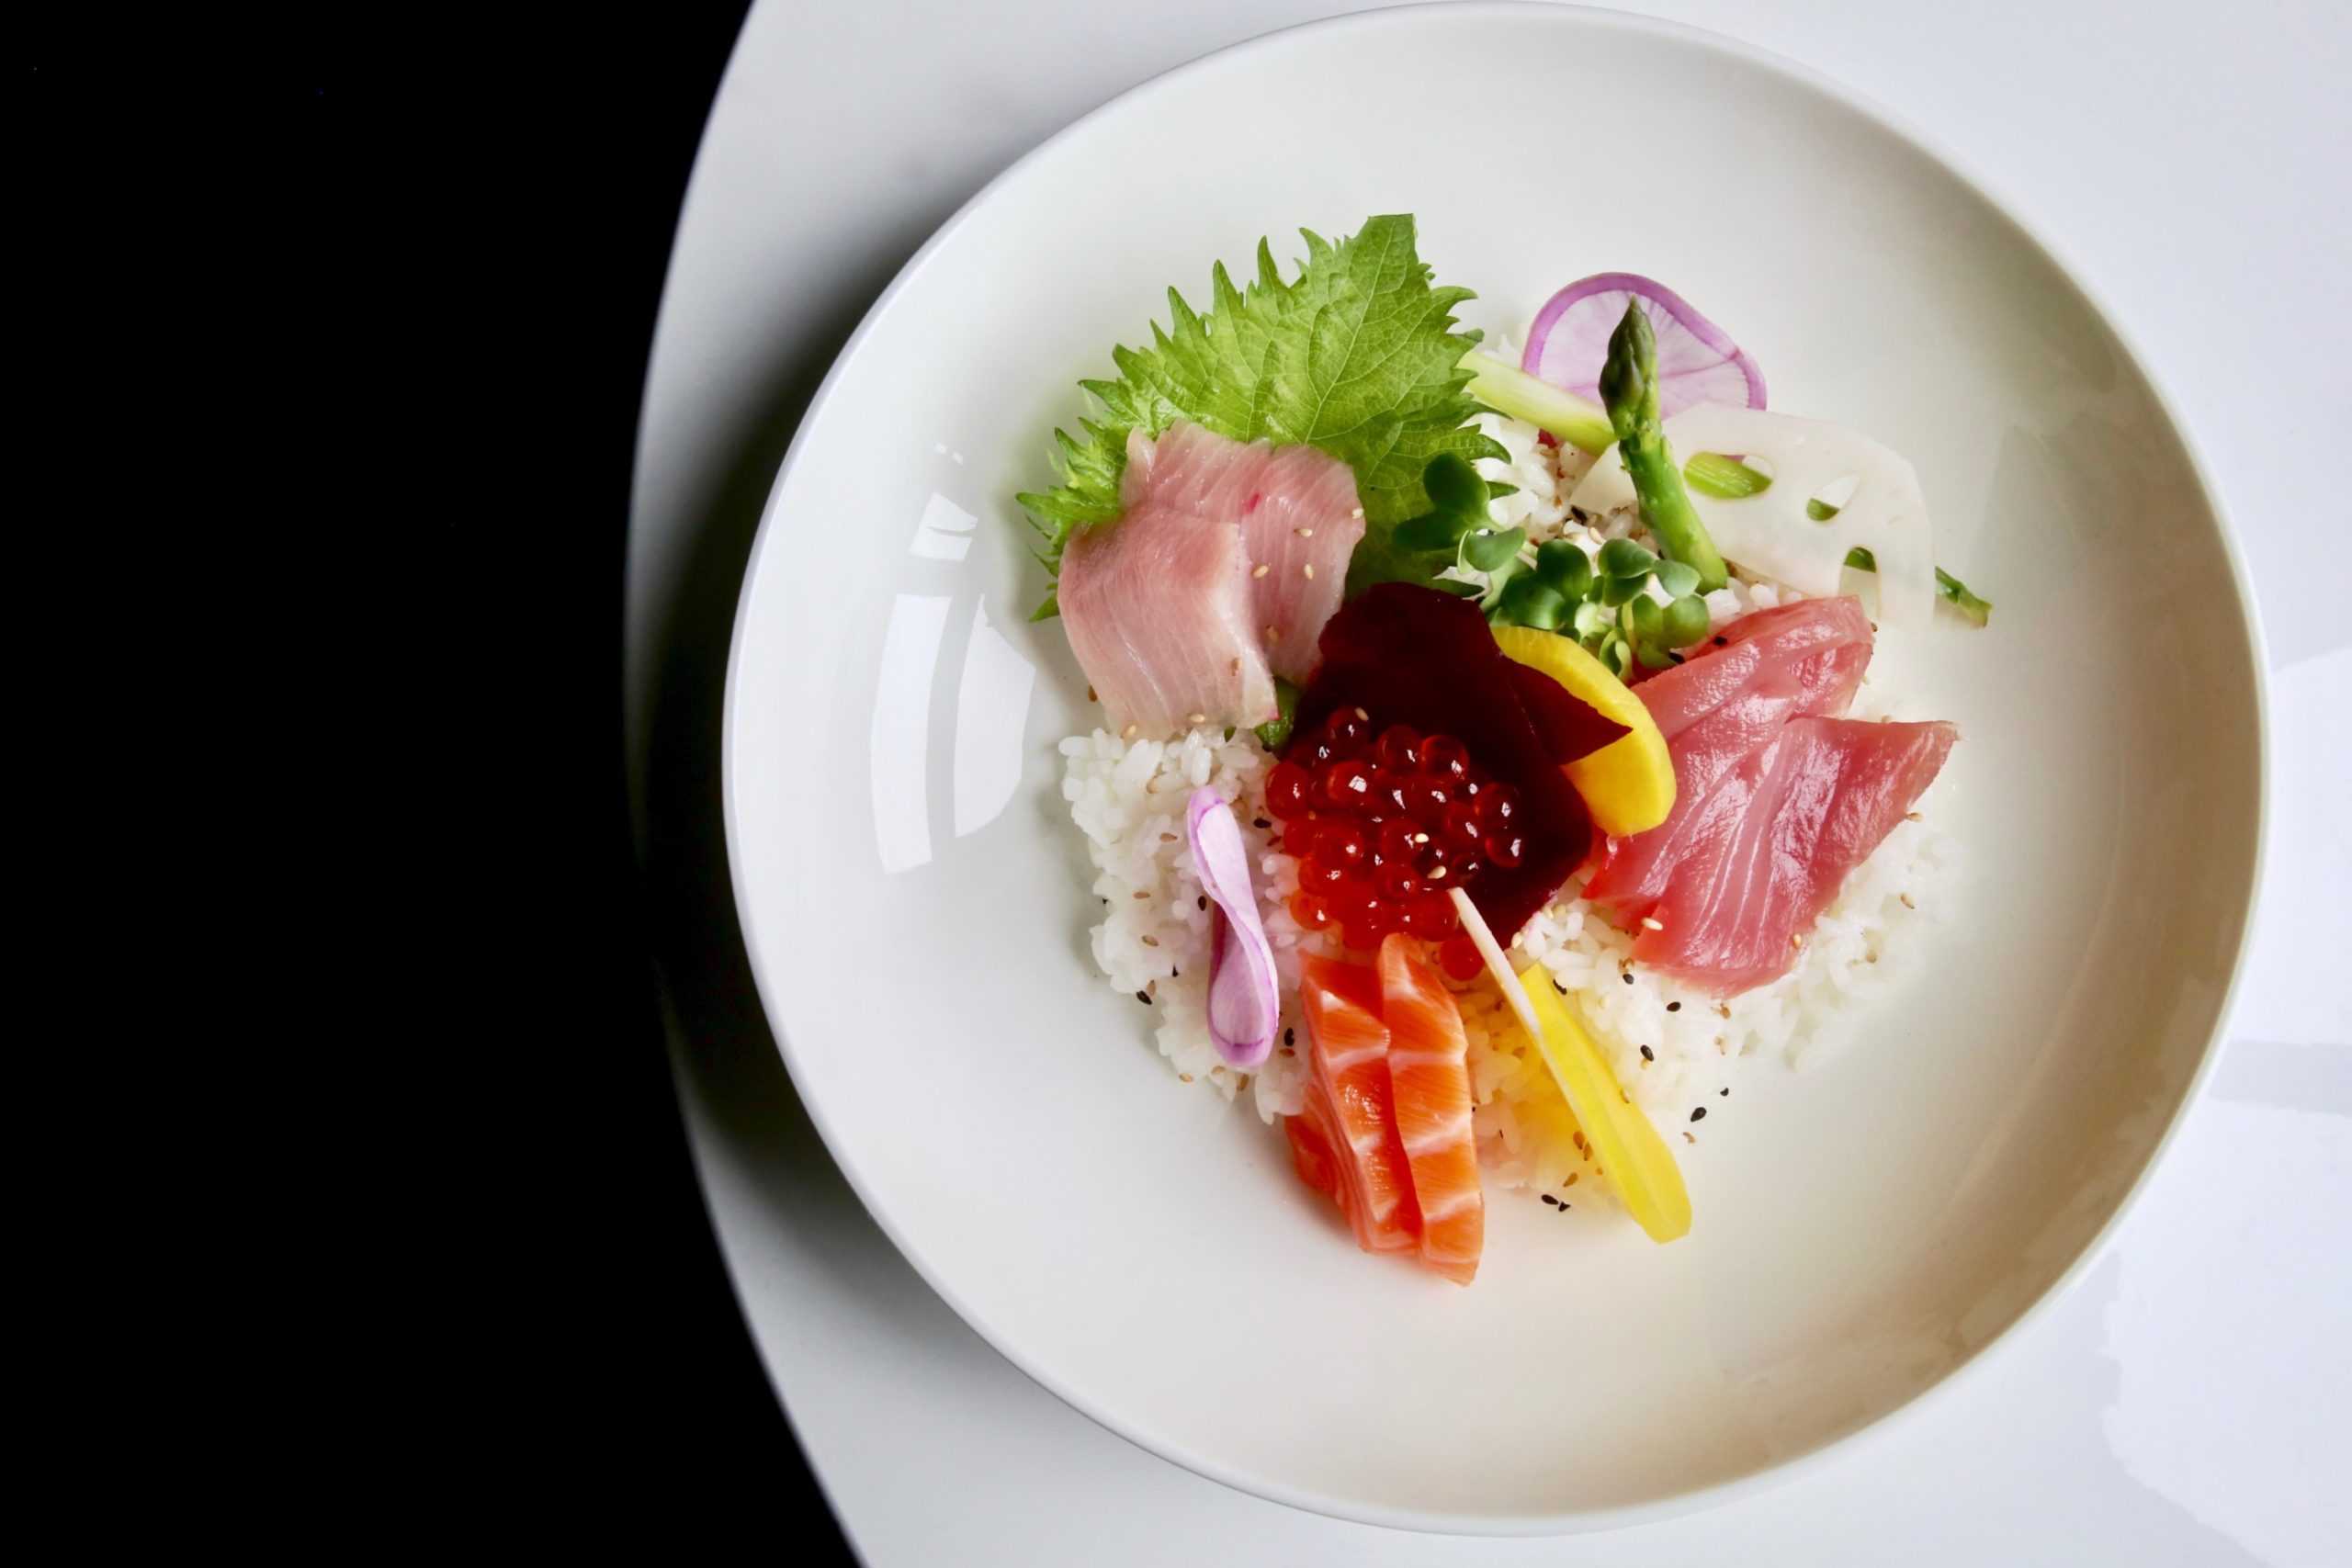 A chirashi bowl is available upstairs in the bar area. Photo by Evy Mages.